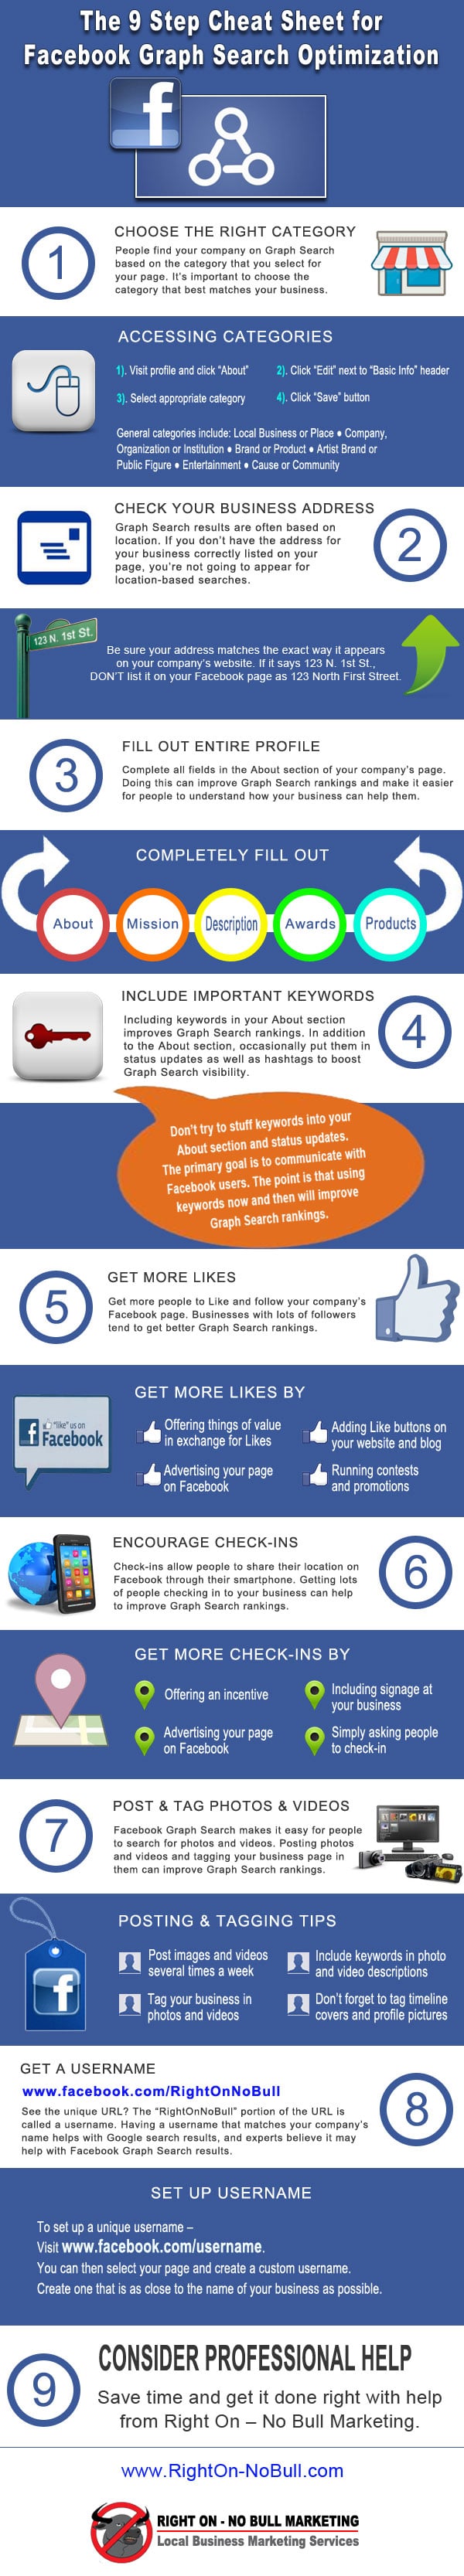 facebook-graph-search-optimization-infographic